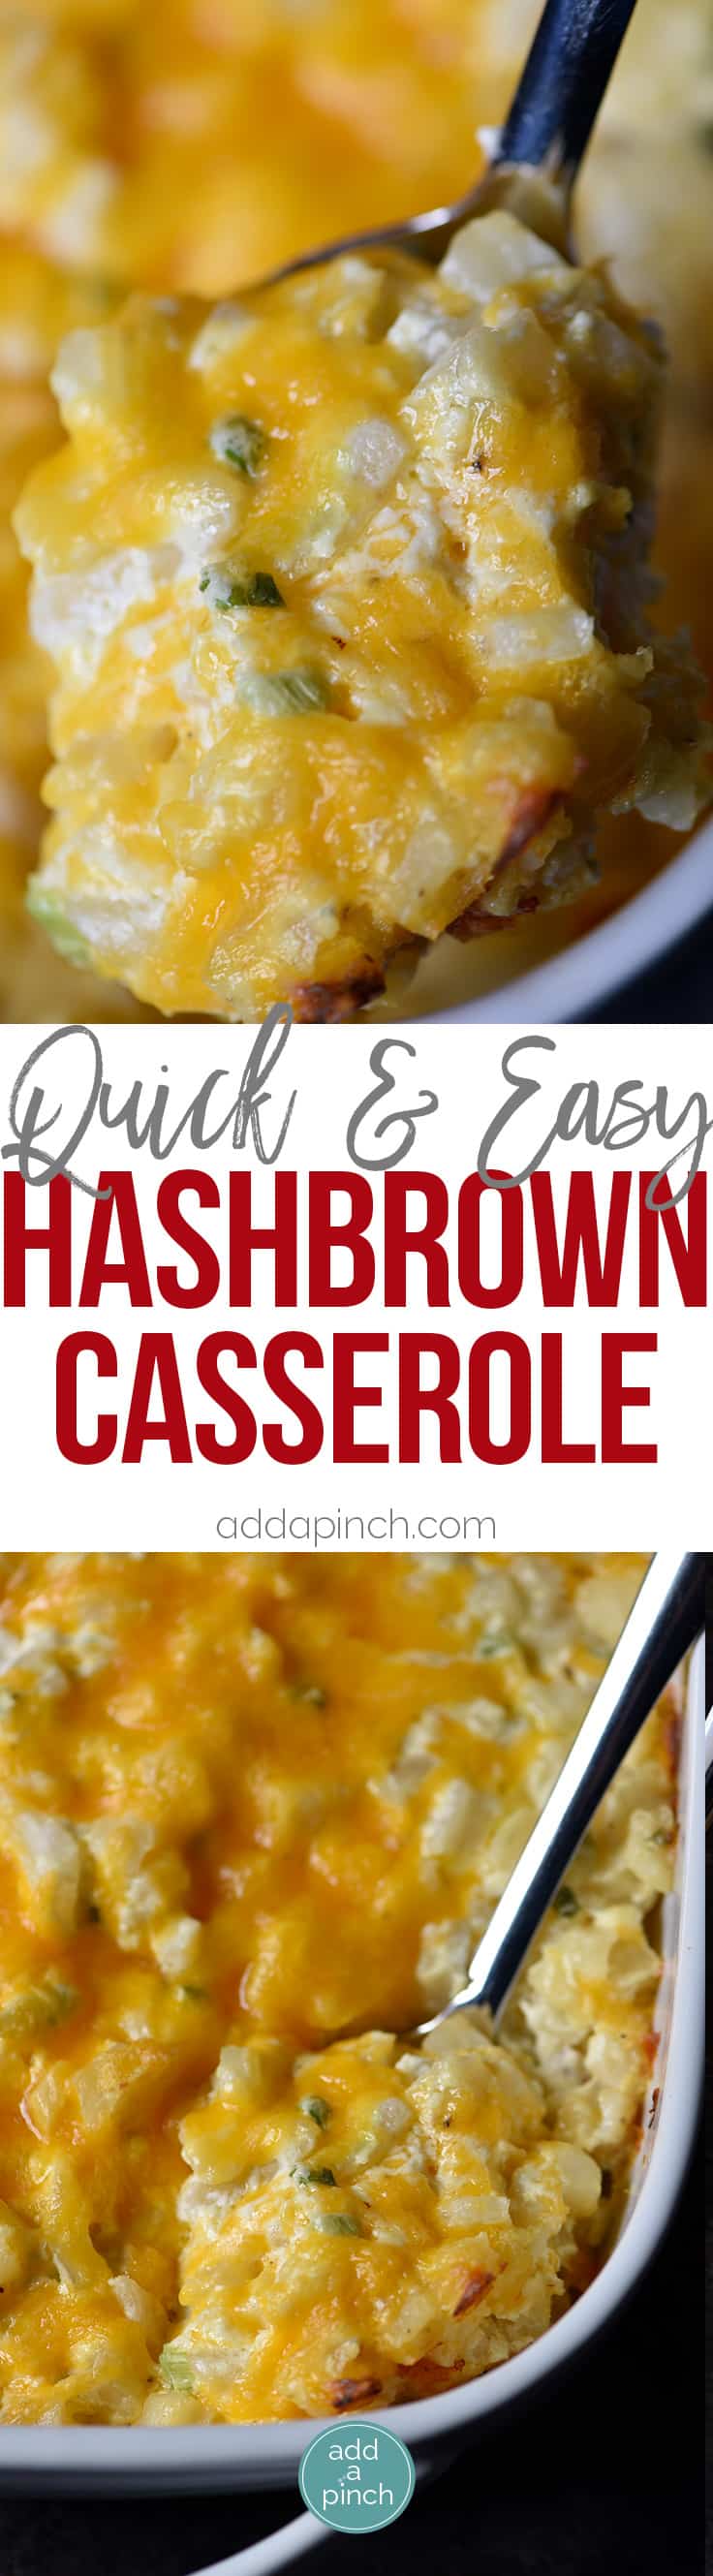 Hashbrown Casserole Recipe - A cheesy potato side dish that comes together in a snap! Perfect to serve when entertaining and a staple on the holiday table! // addapinch.com